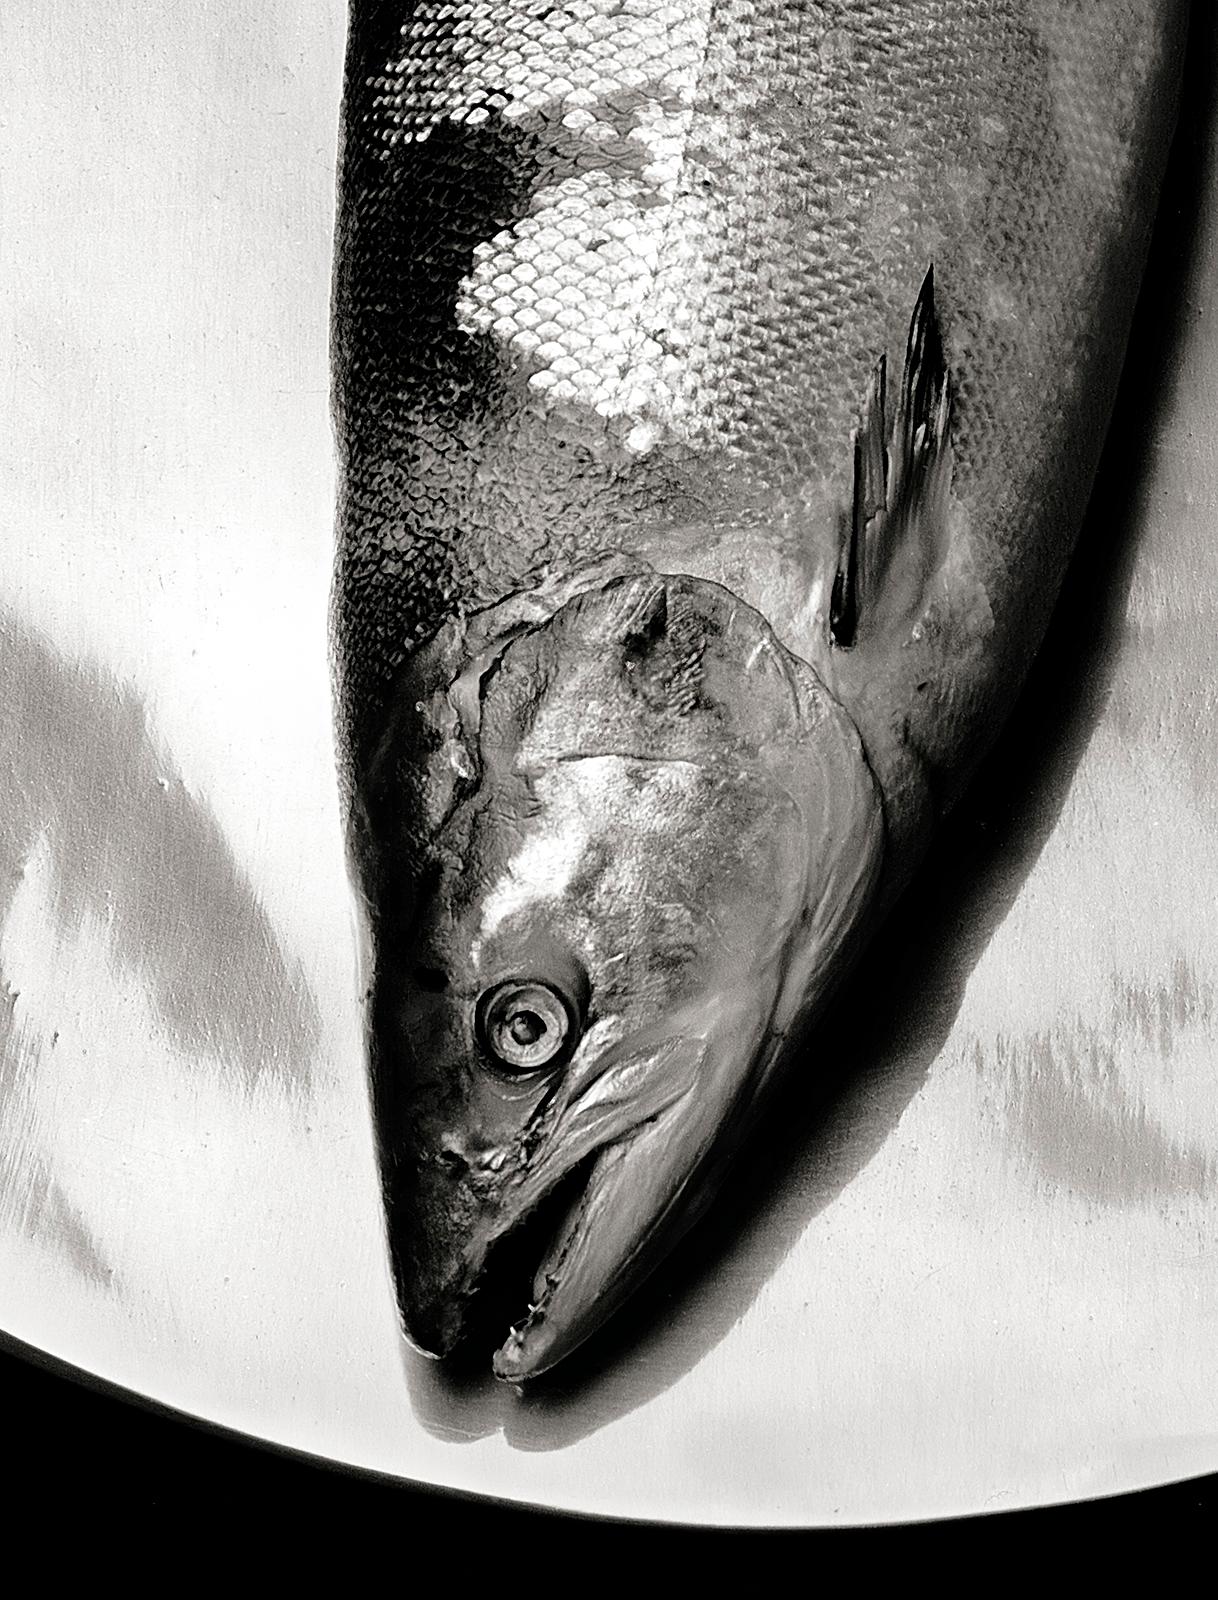 Salmon - Signed limited edition still life print, Black white photo, Oversize - Photograph by Ian Sanderson